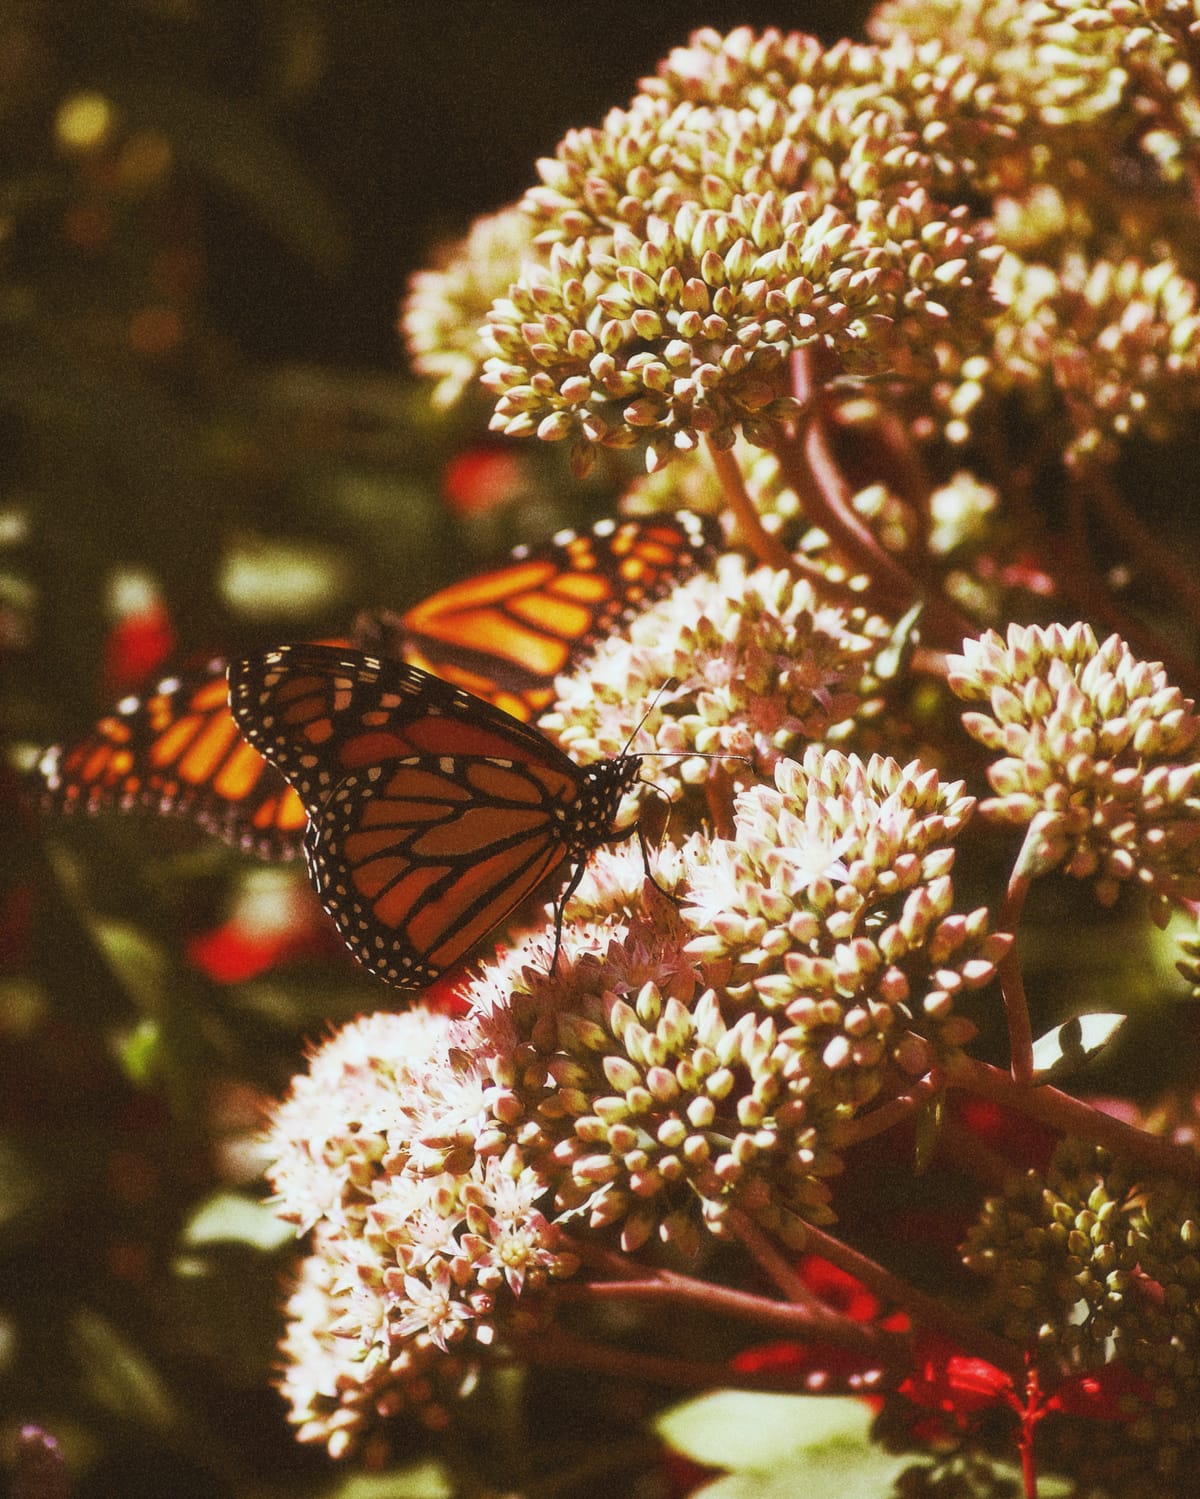 Two monarch butterflies on stonecrop flowers